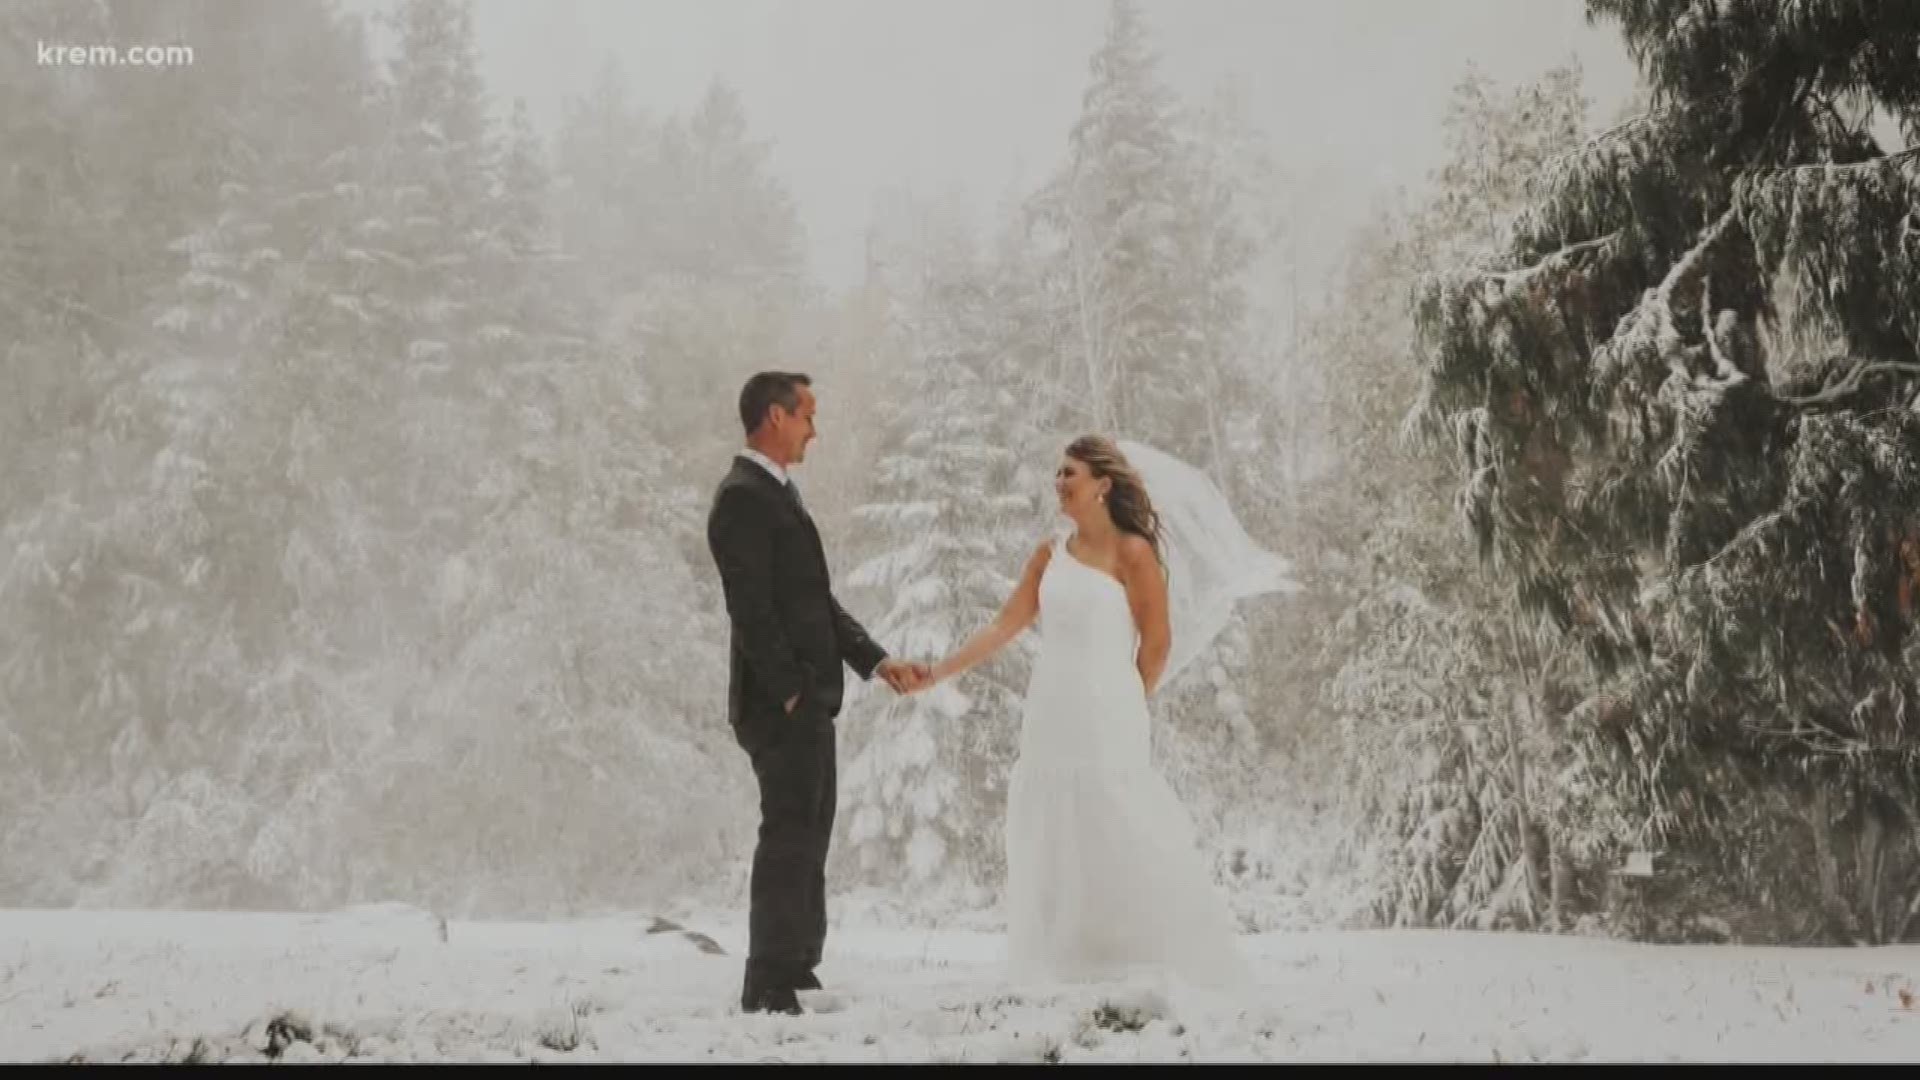 Several couples tied the knot during an unusual September snowstorm in the Inland Northwest. One couple even said they wanted snow on their wedding day!